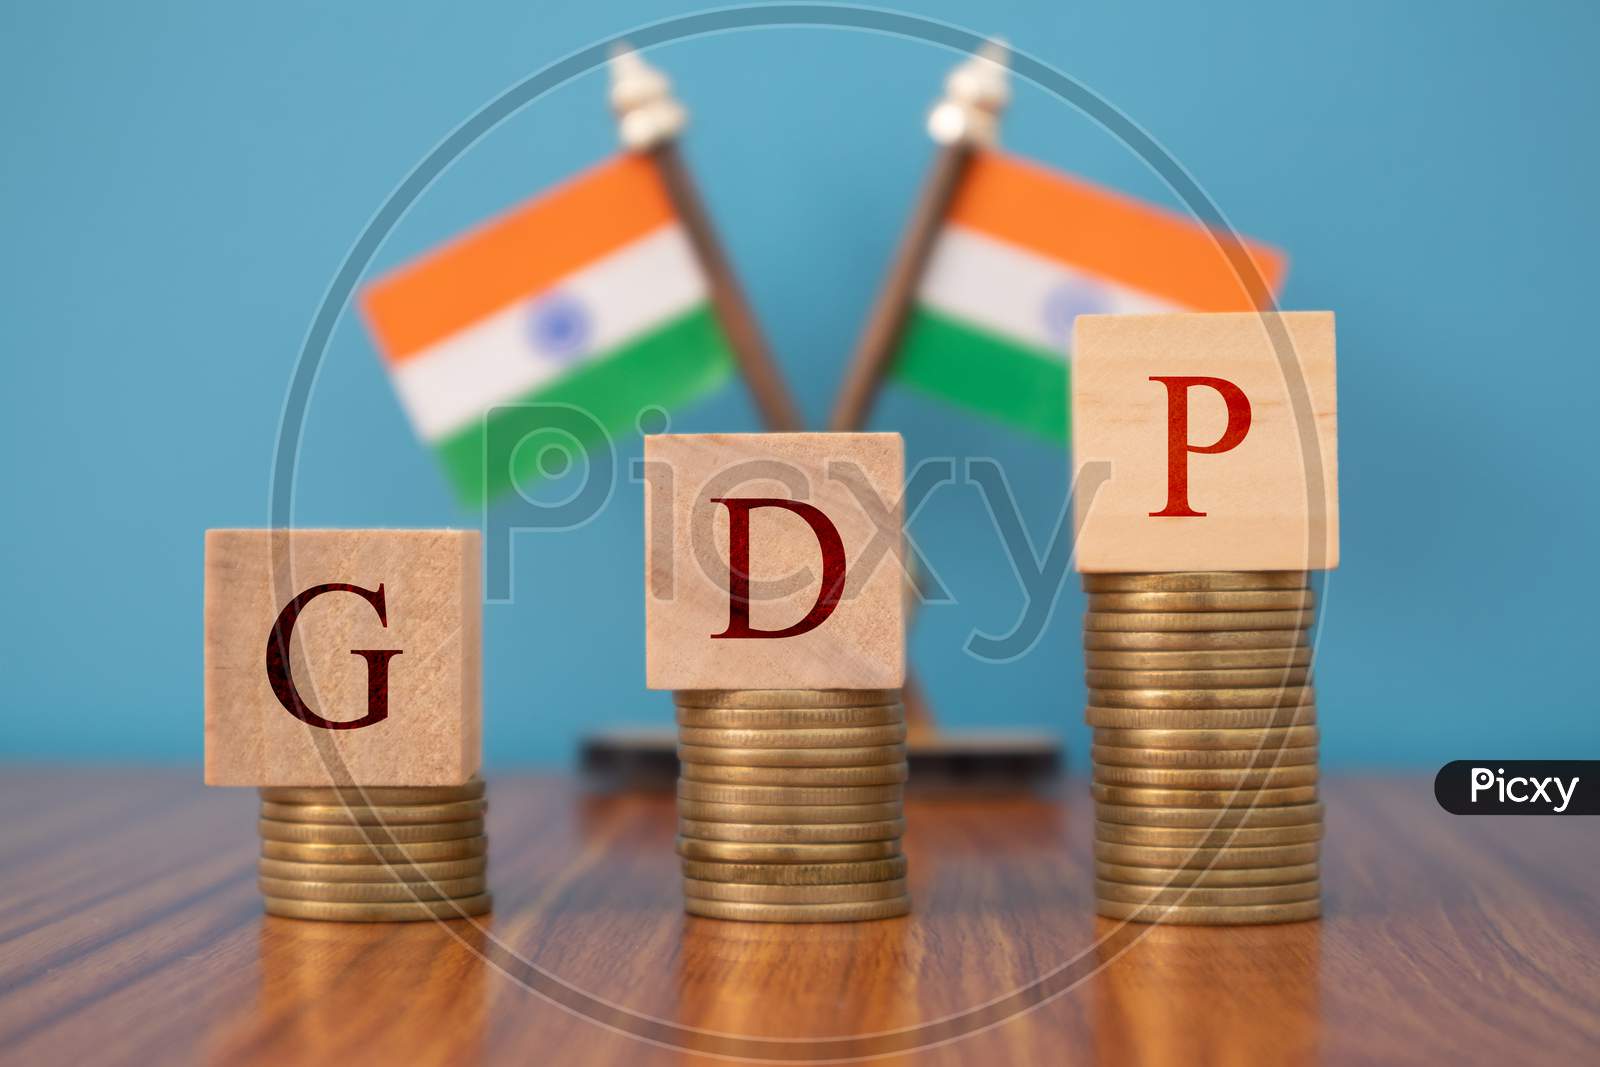 Gdp Or Gross Domestic Product In Wooden Block Letters On Coins In Increasing Order With Indian Flag As A Background.